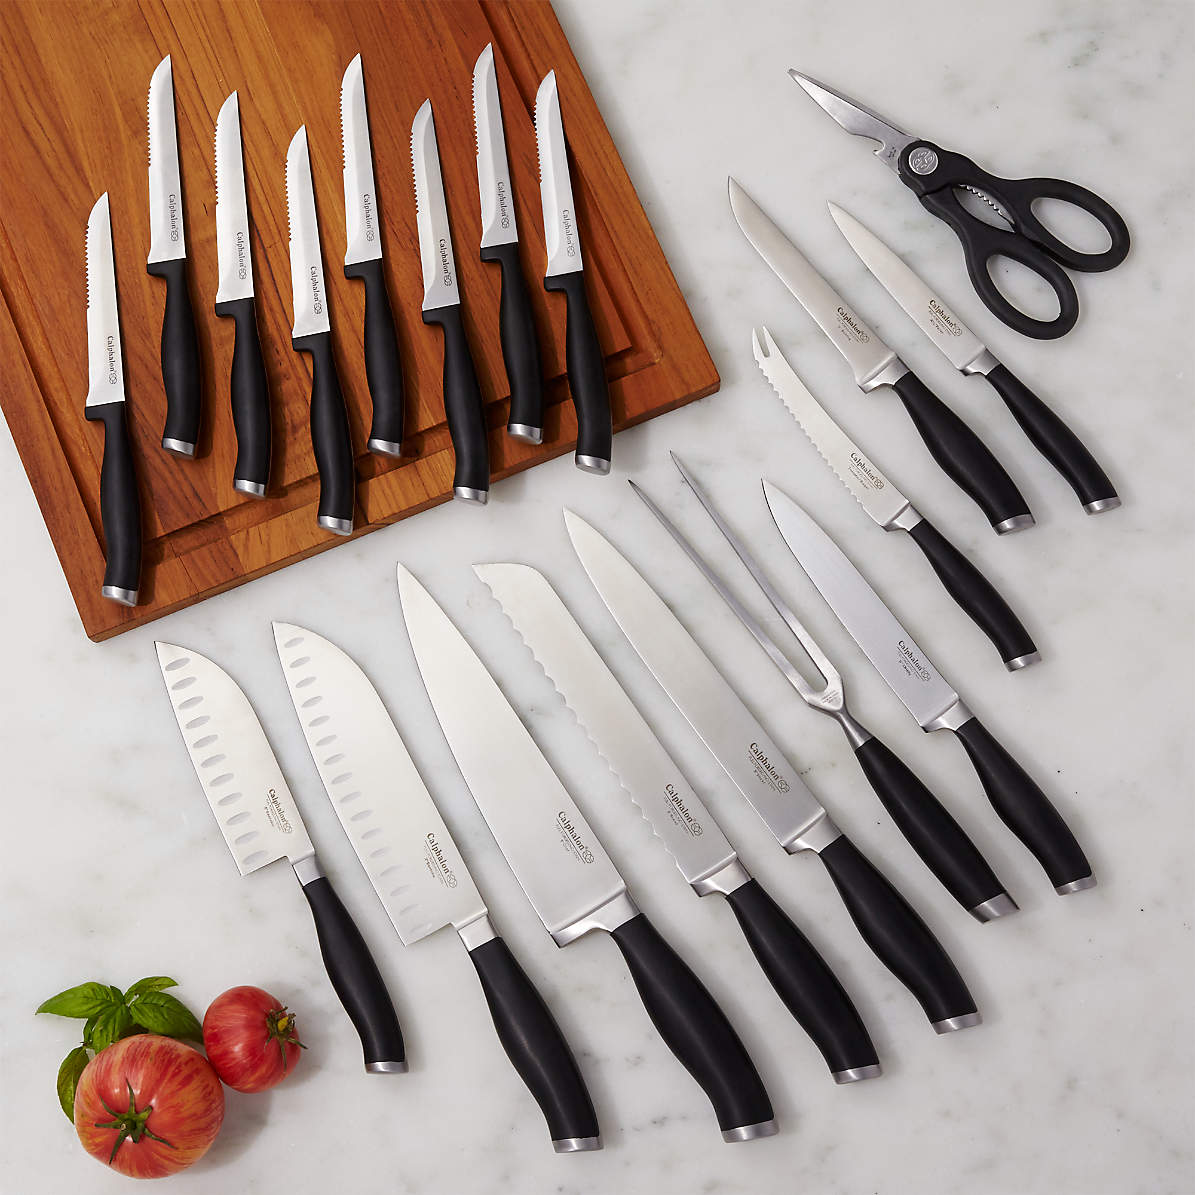 Calphalon 20 Piece Contemporary Steel Cutlery Set with Built In